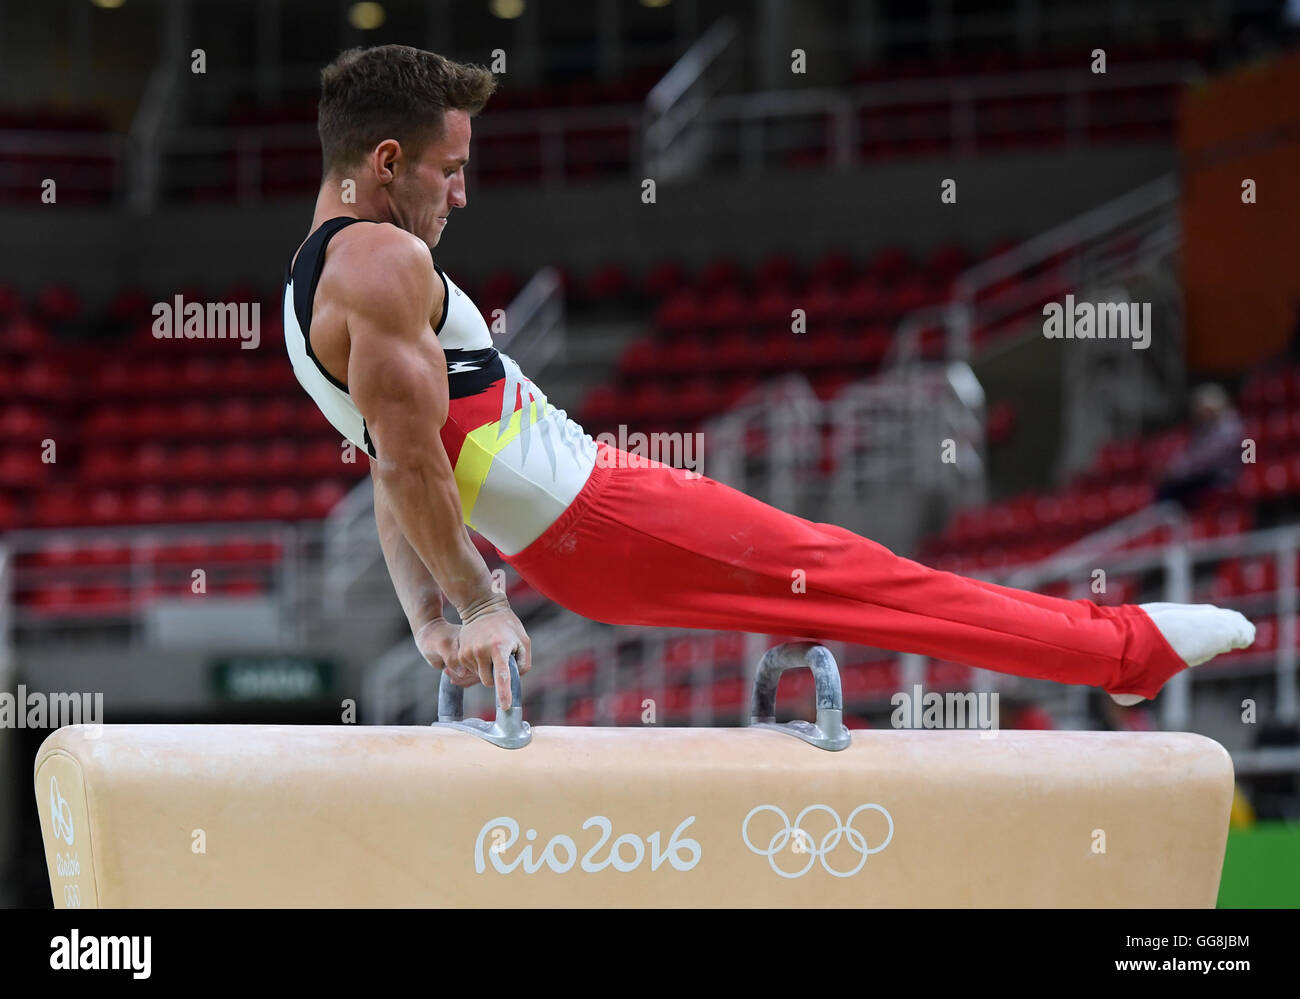 Rio de Janeiro, Brazil. 3rd Aug, 2016. Andreas Bretschneider of Germany in action during a training session of the mens' Artistic Gymnastics on pommel horse at Olympic Arena in Barra prior to the Rio 2016 Olympic Games in Rio de Janeiro, Brazil, 3 August 2016. Rio 2016 Olympic Games take place from 05 to 21 August. Photo: Bernd Thissen/dpa/Alamy Live News Stock Photo